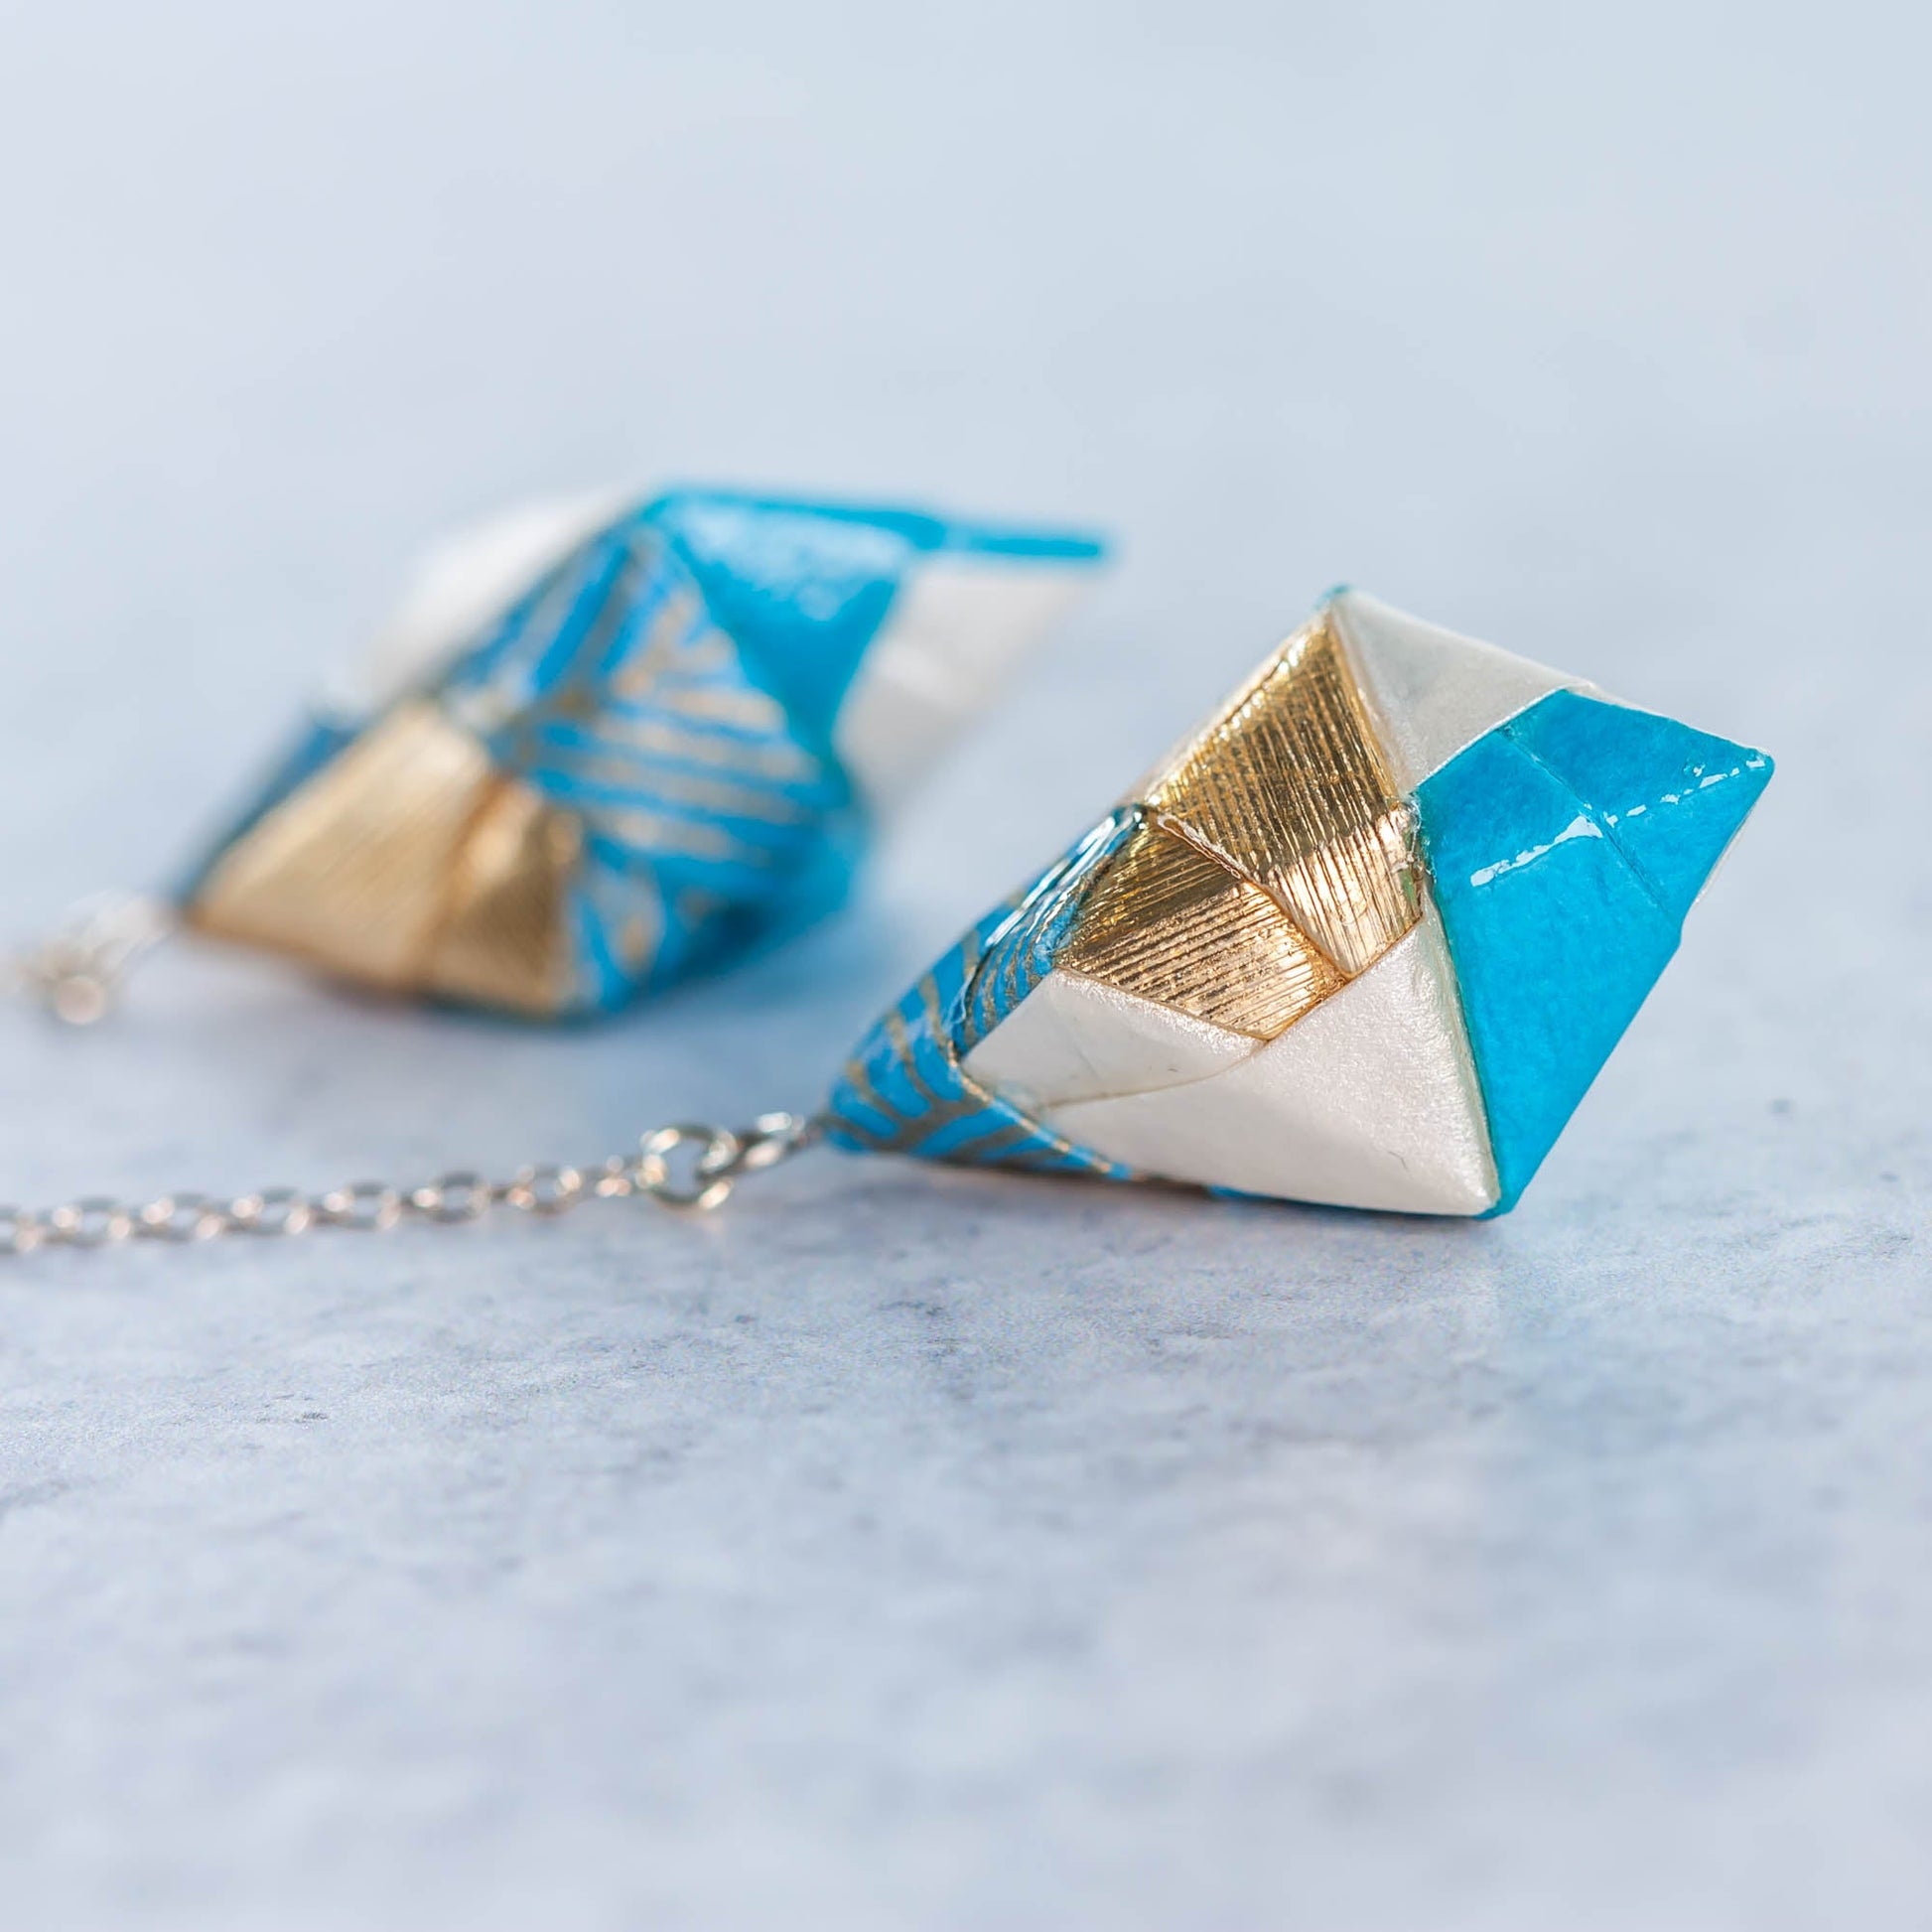 Origami Diamond Paper Earrings - Blue Gold White - By LeeMo Designs in Bend, Oregon